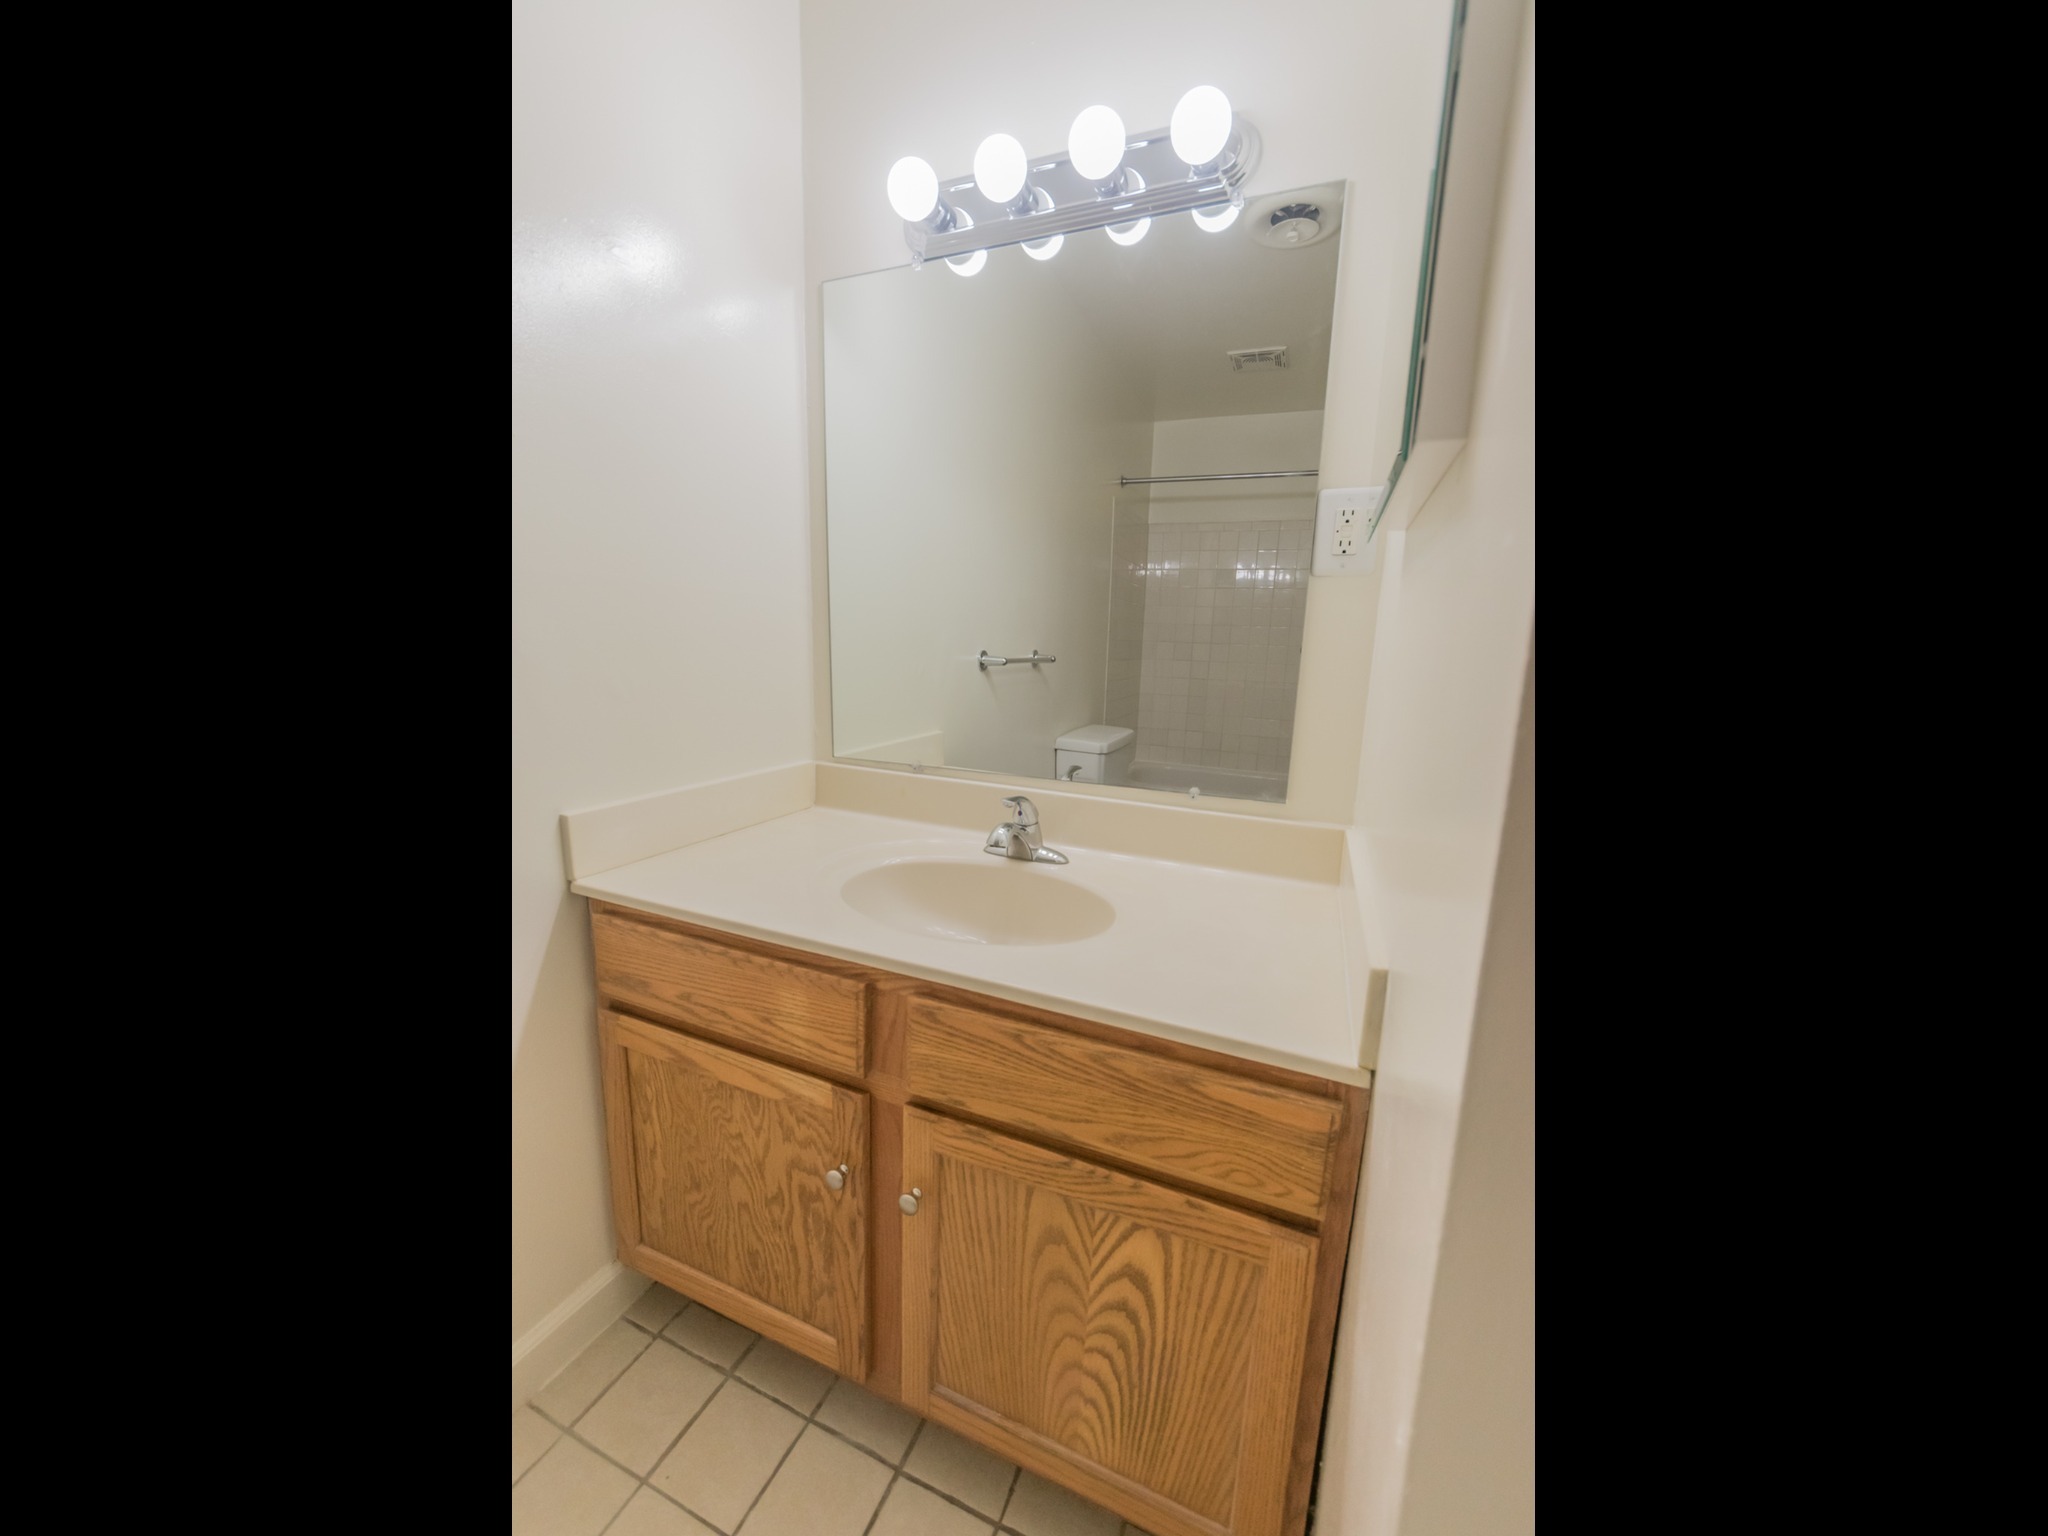 Bathroom with wooden cabinets, a sink with white countertops, a mirror, and vanity lights.